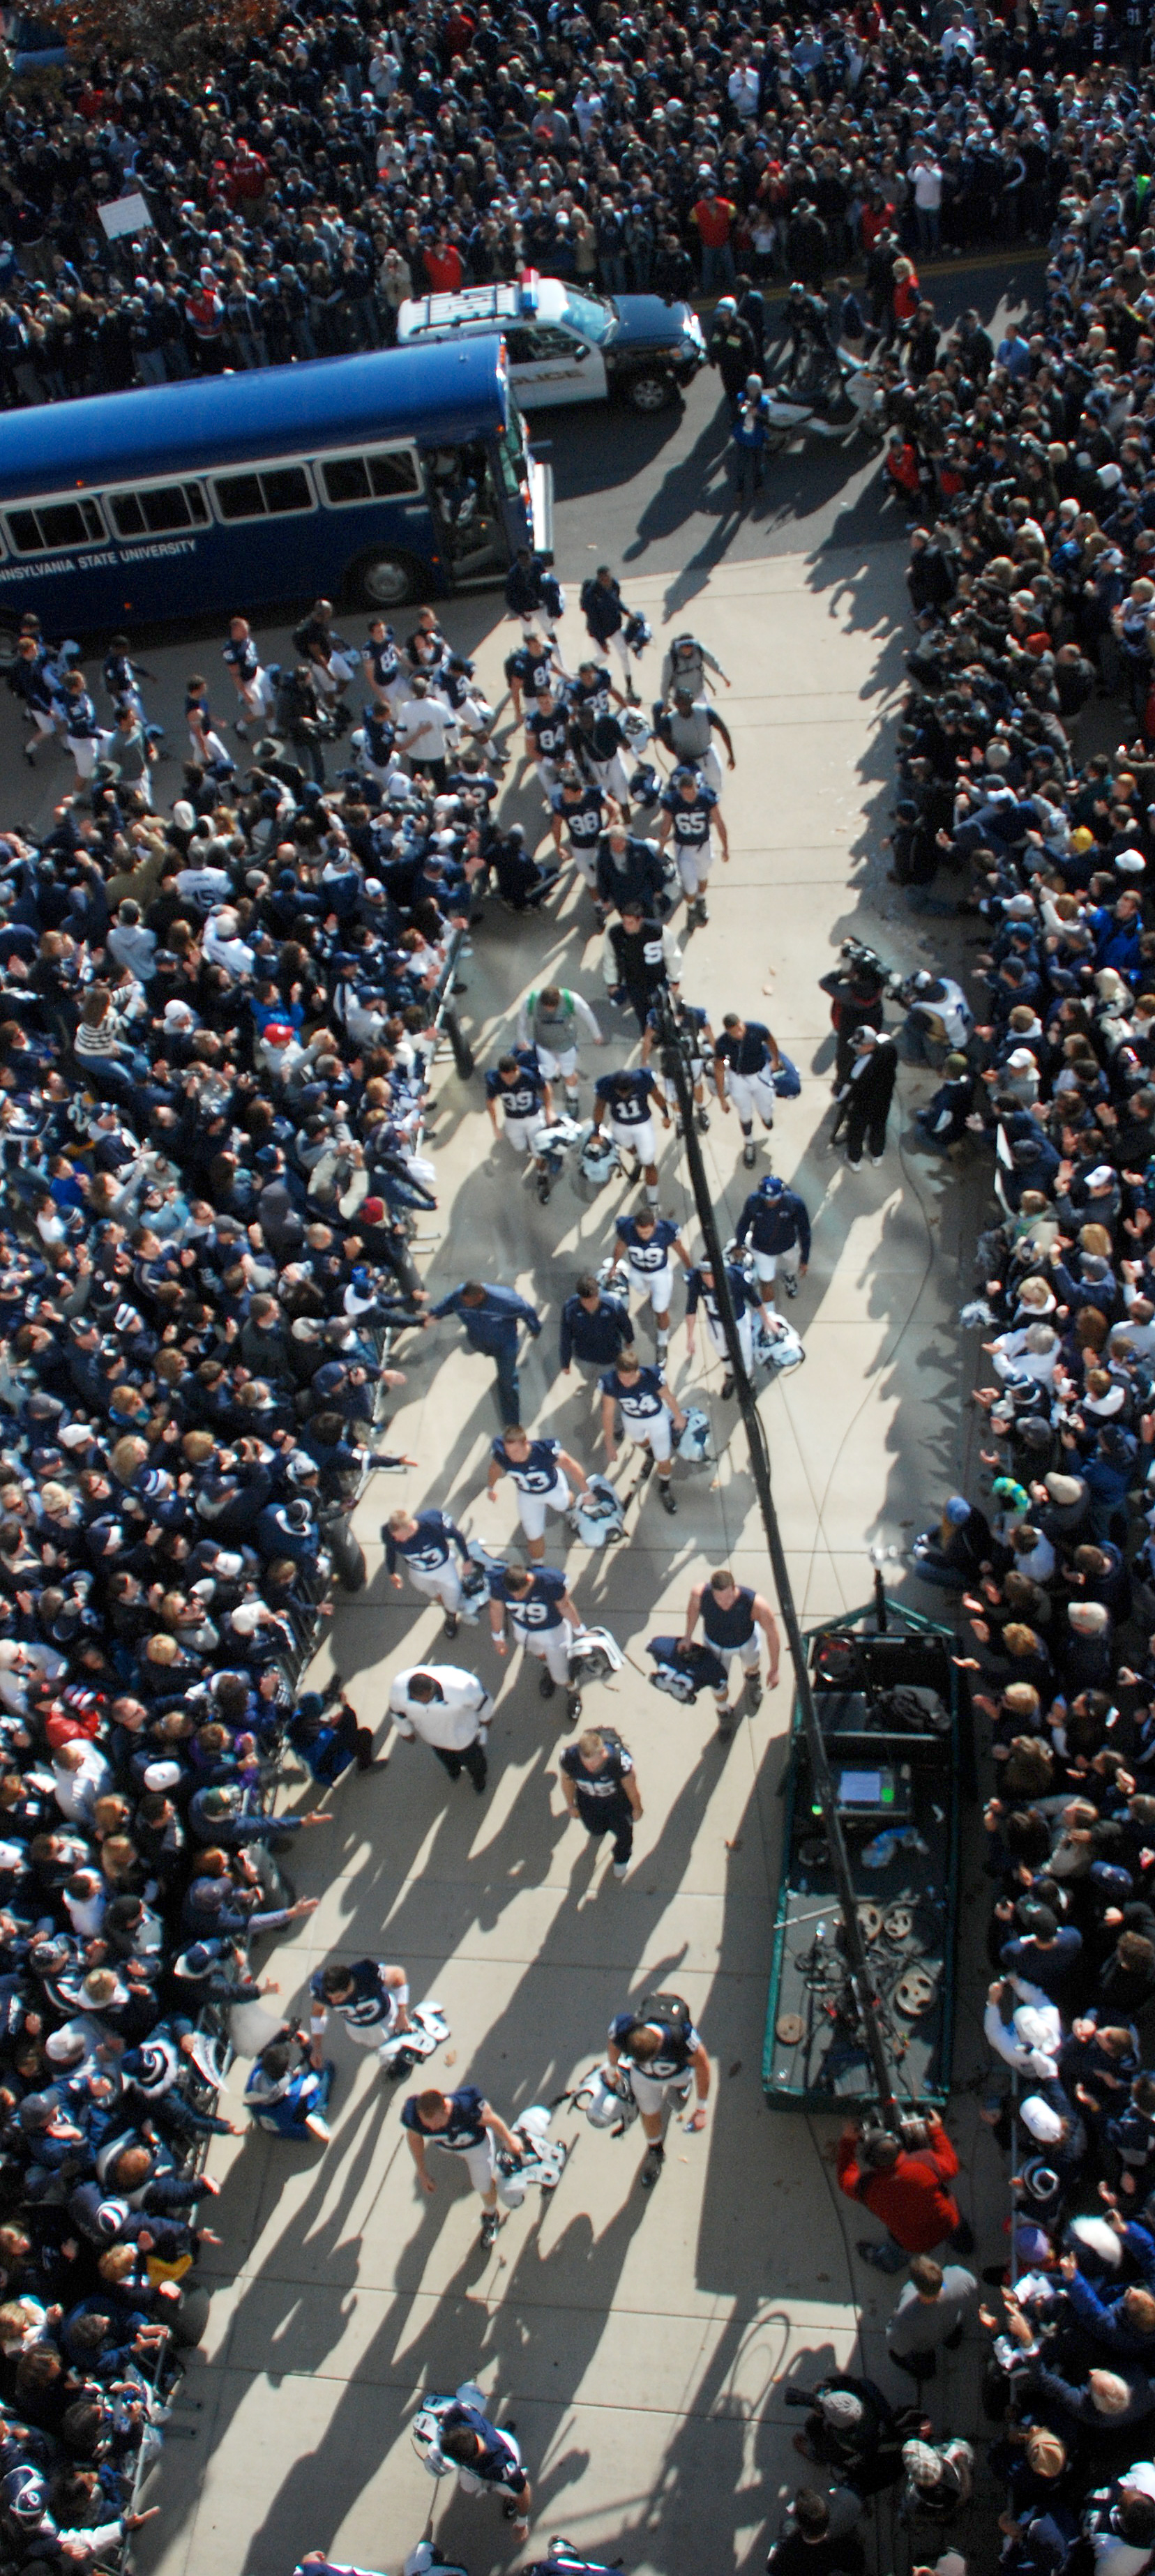  Football players step off their buses to and greet fans as they enter the stadium before their game against Nebraska on Saturday, Nov. 12, 2011. 